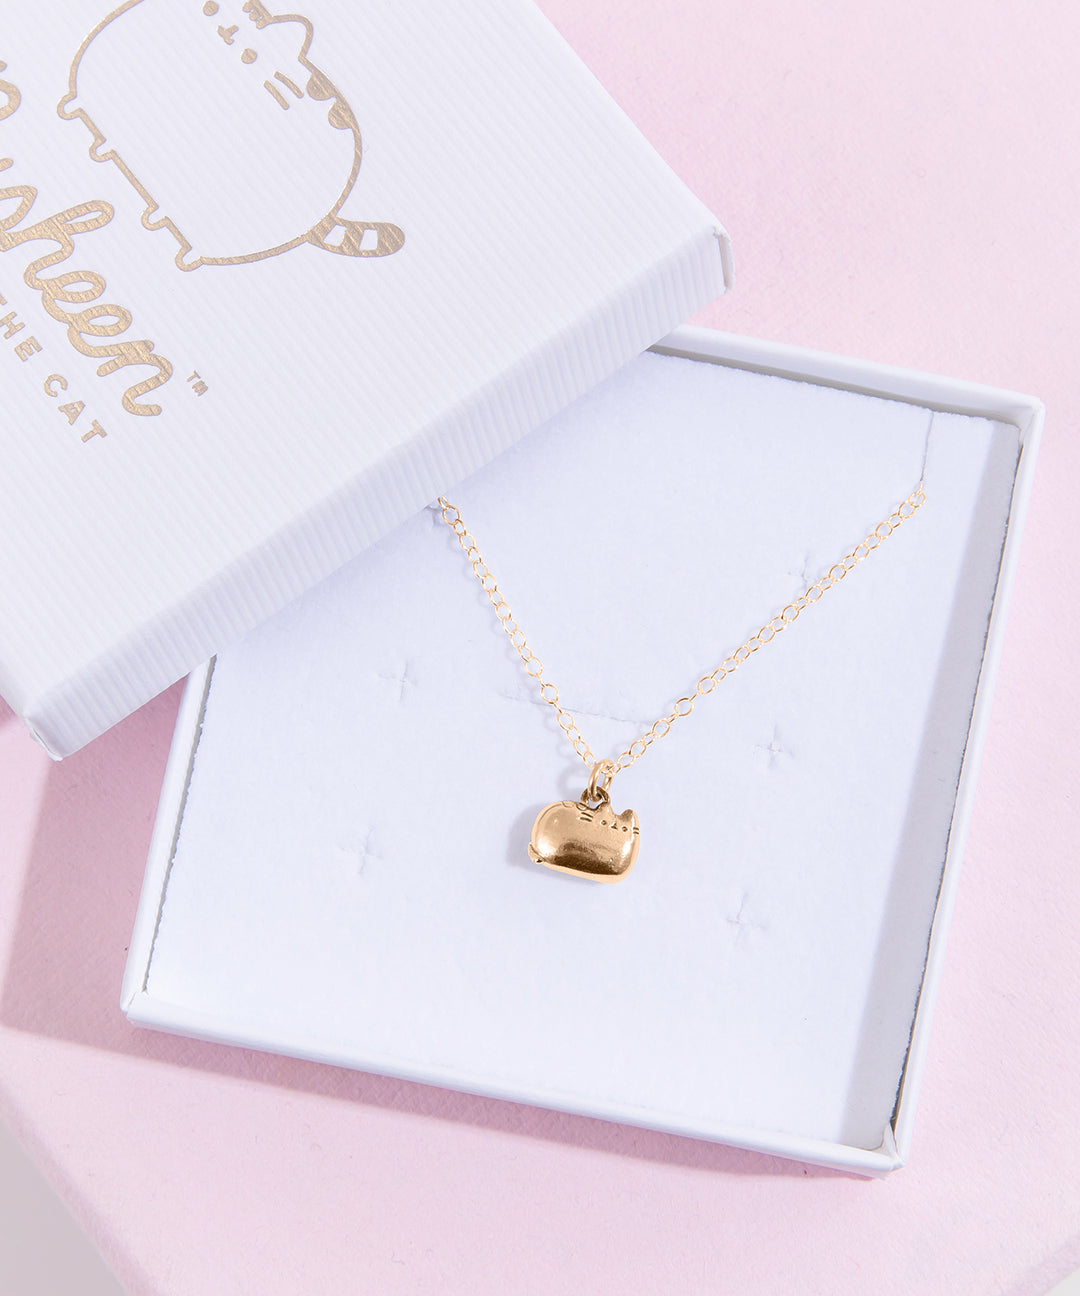 Tiny Gold Pave Charm Necklace, Dainty Gold Necklace, Pave, Dainty, Necklace,  Tiny Necklace, Bridal, Wedding, Crystal, Sparkle, Delicate,gold - Etsy